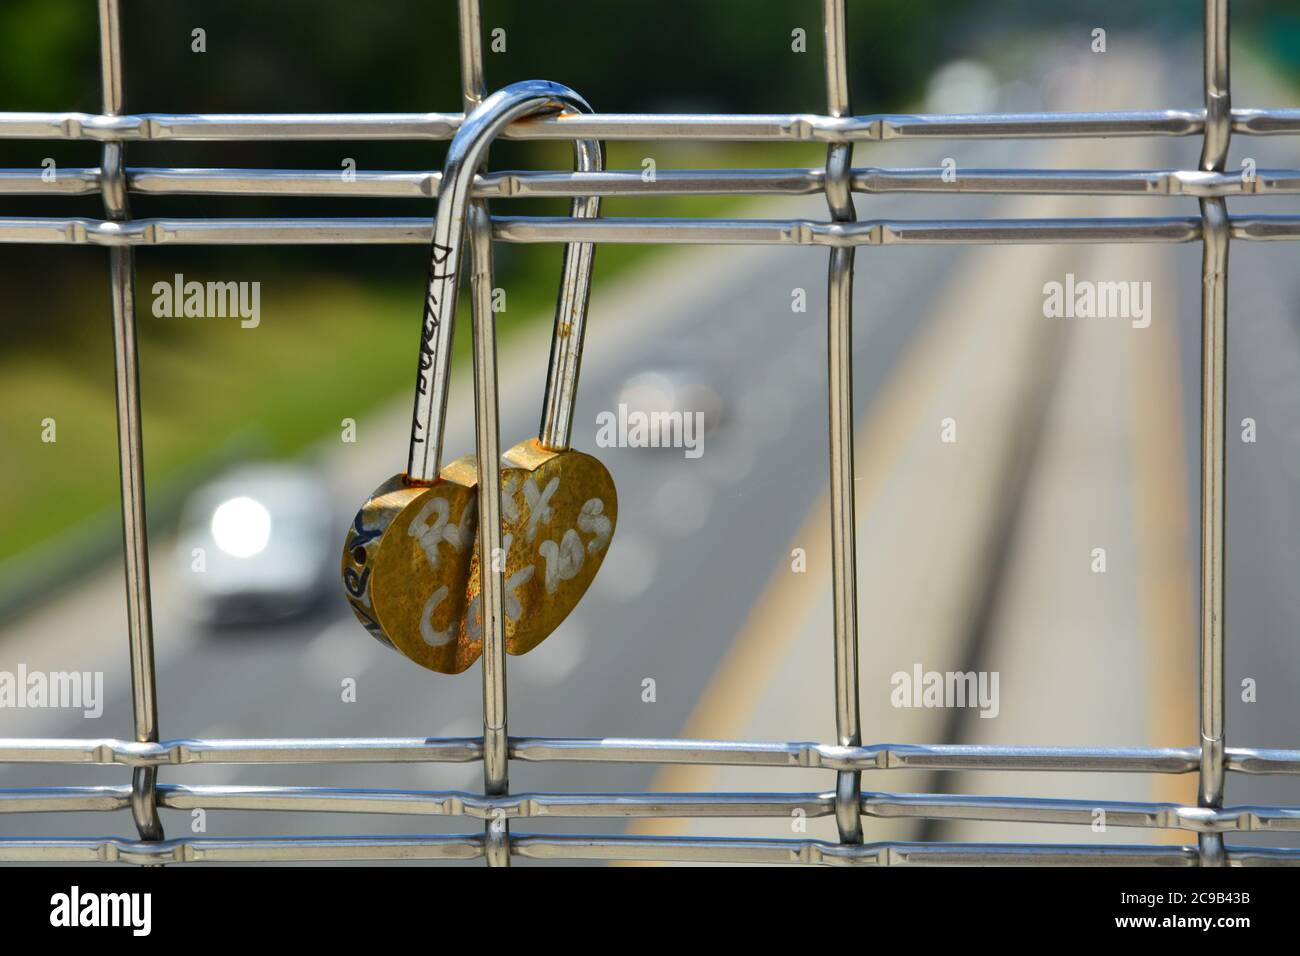 Love locks have started to accumulate on the American Tobacco Trail bridge over Interstate 40 in Durham, NC. Stock Photo